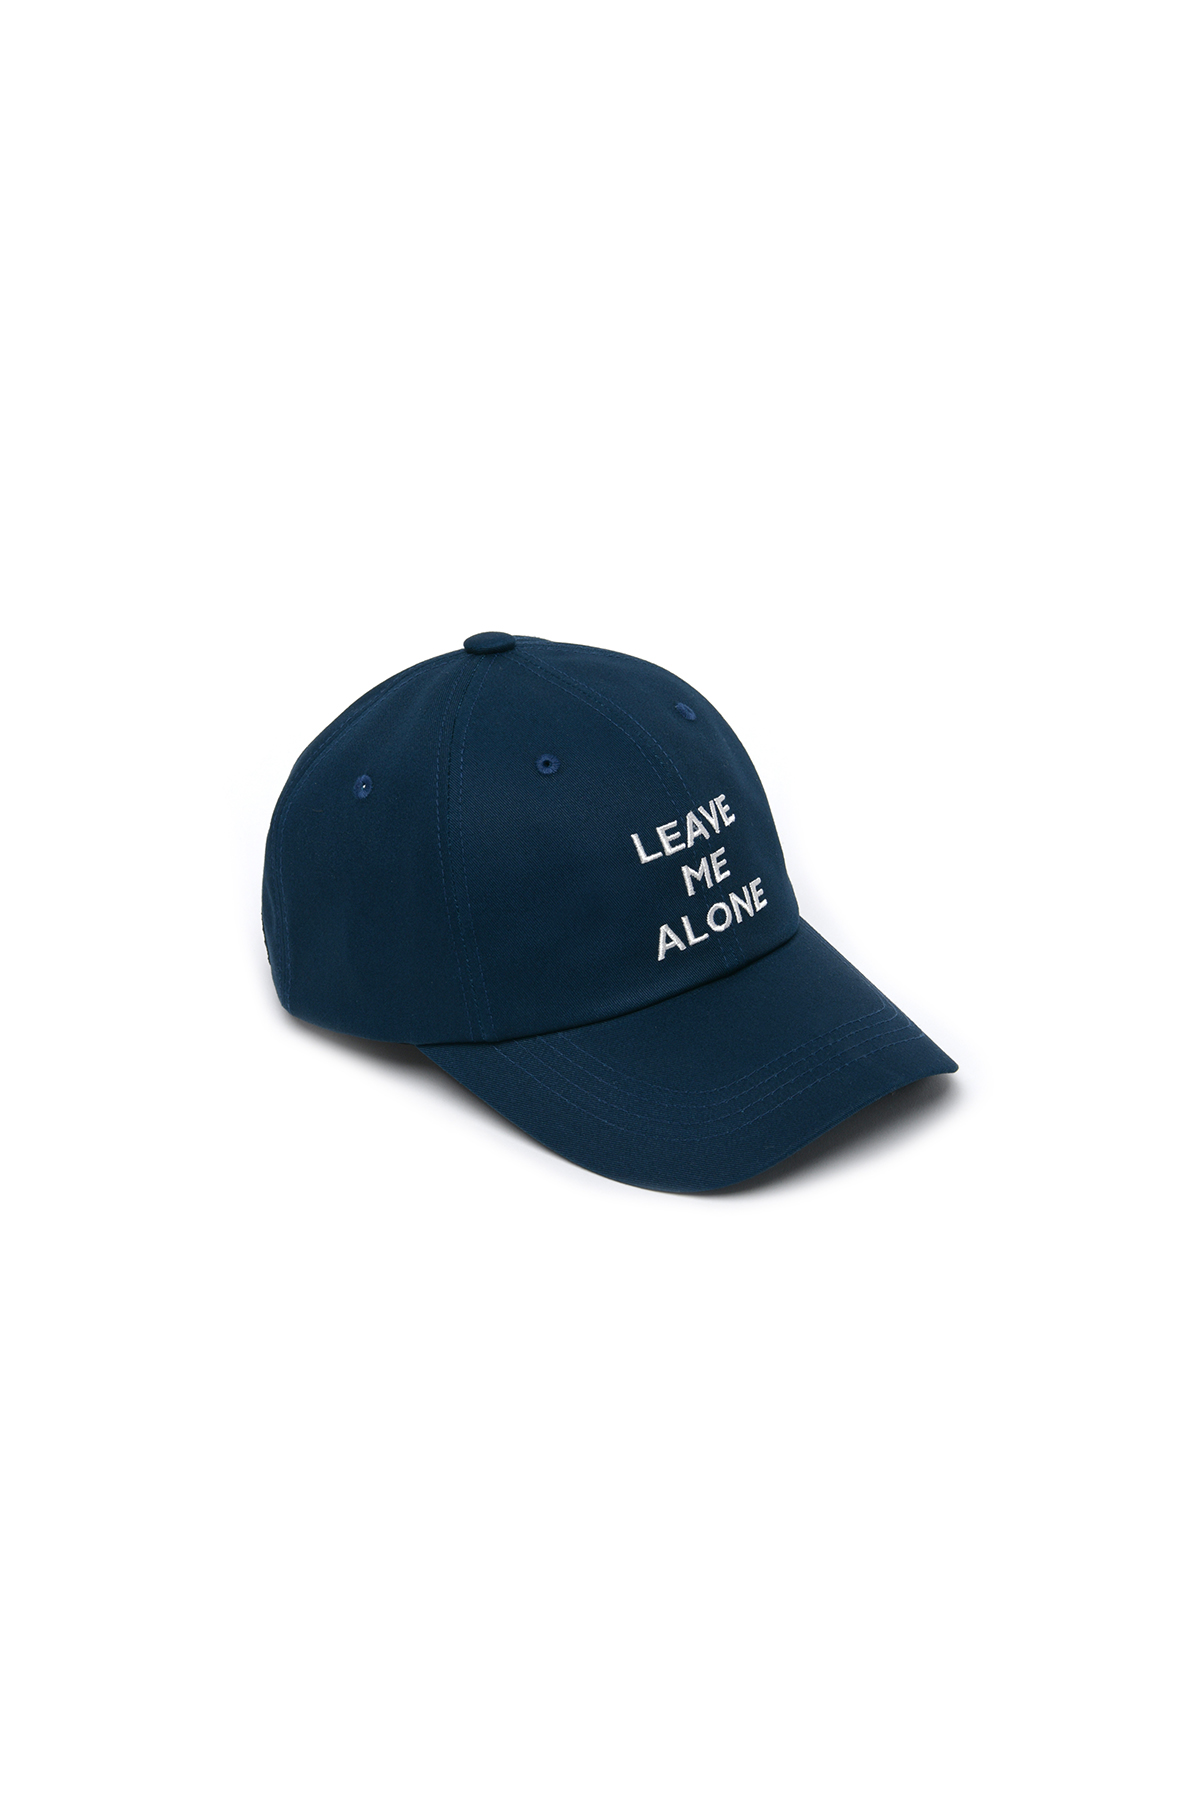 LEAVE ME ALONE EMBROIDERED BALL CAP NAVY